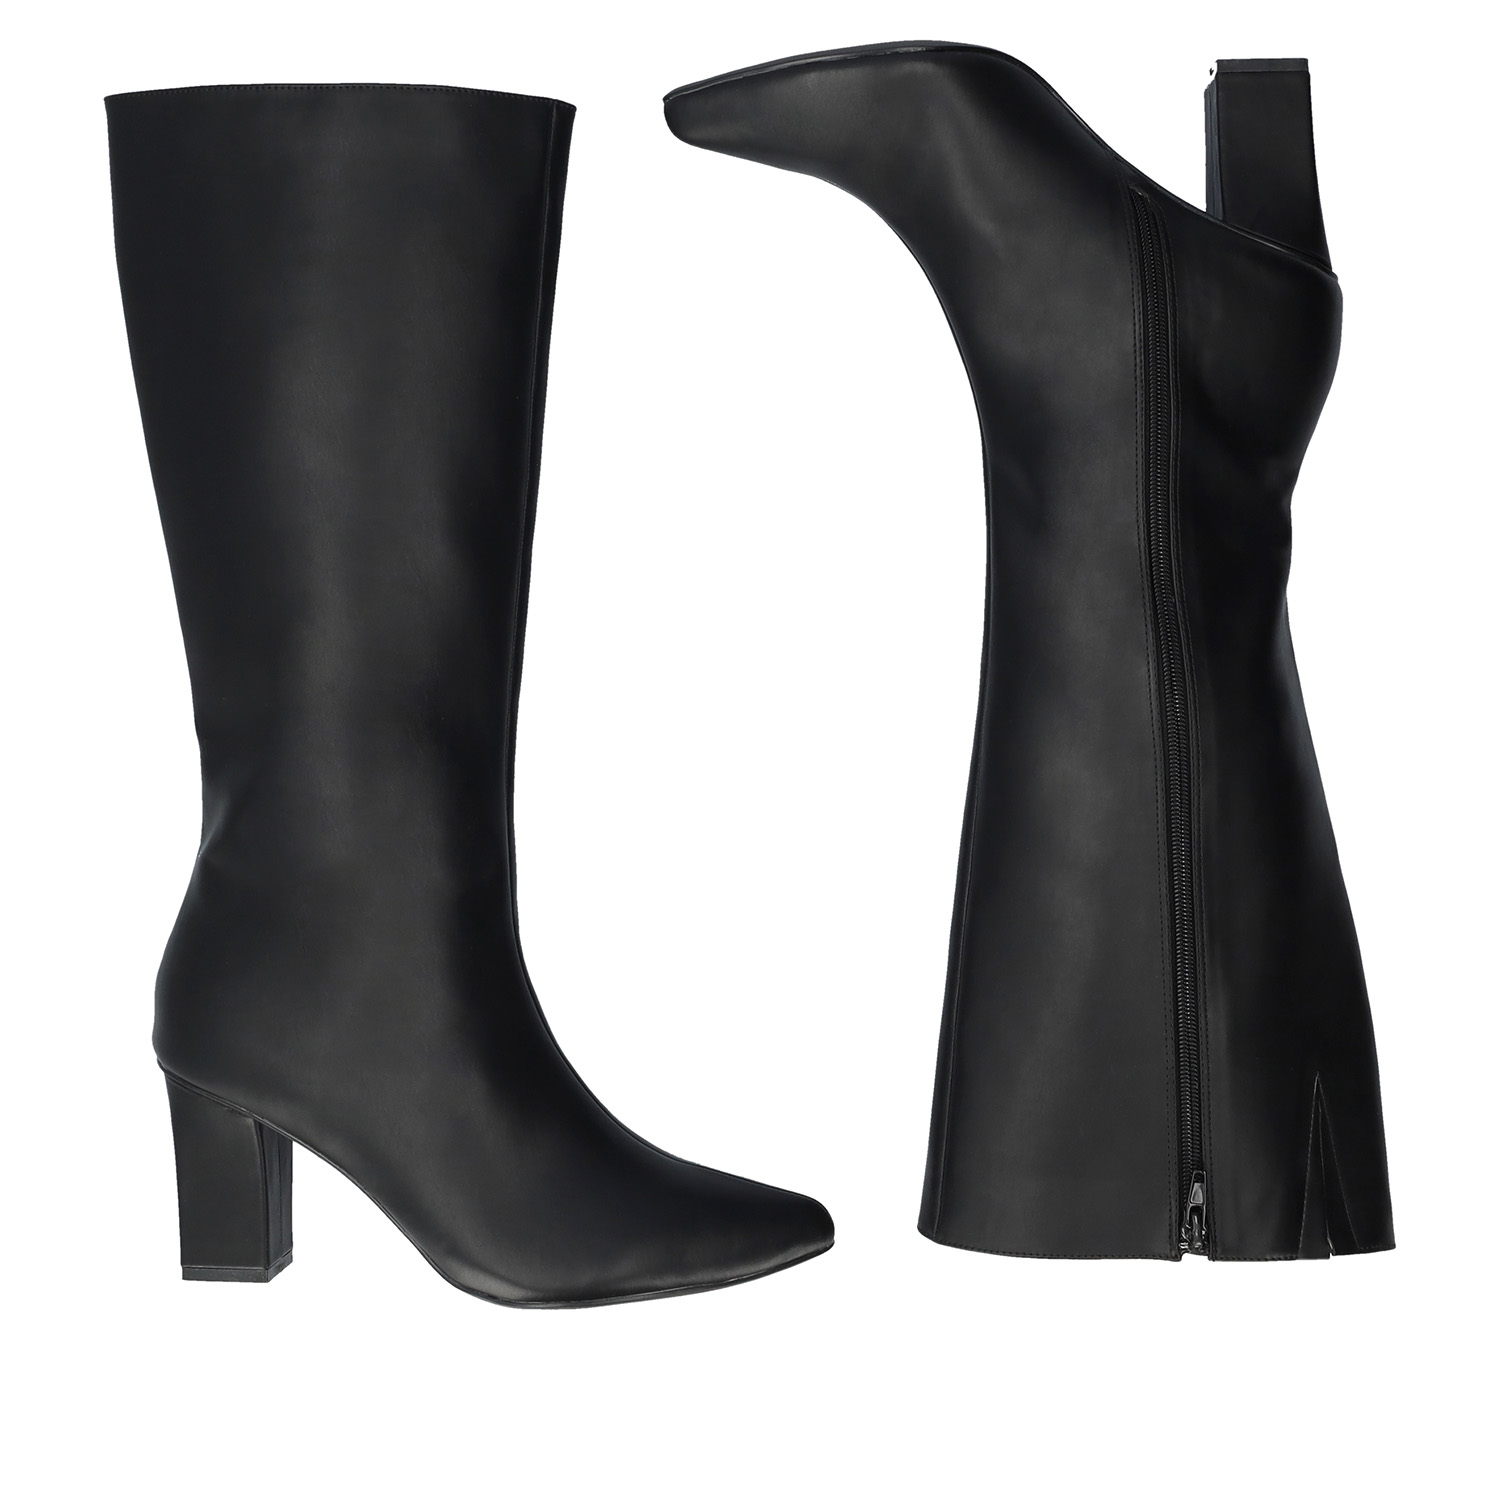 Smooth black colored faux leather boots 